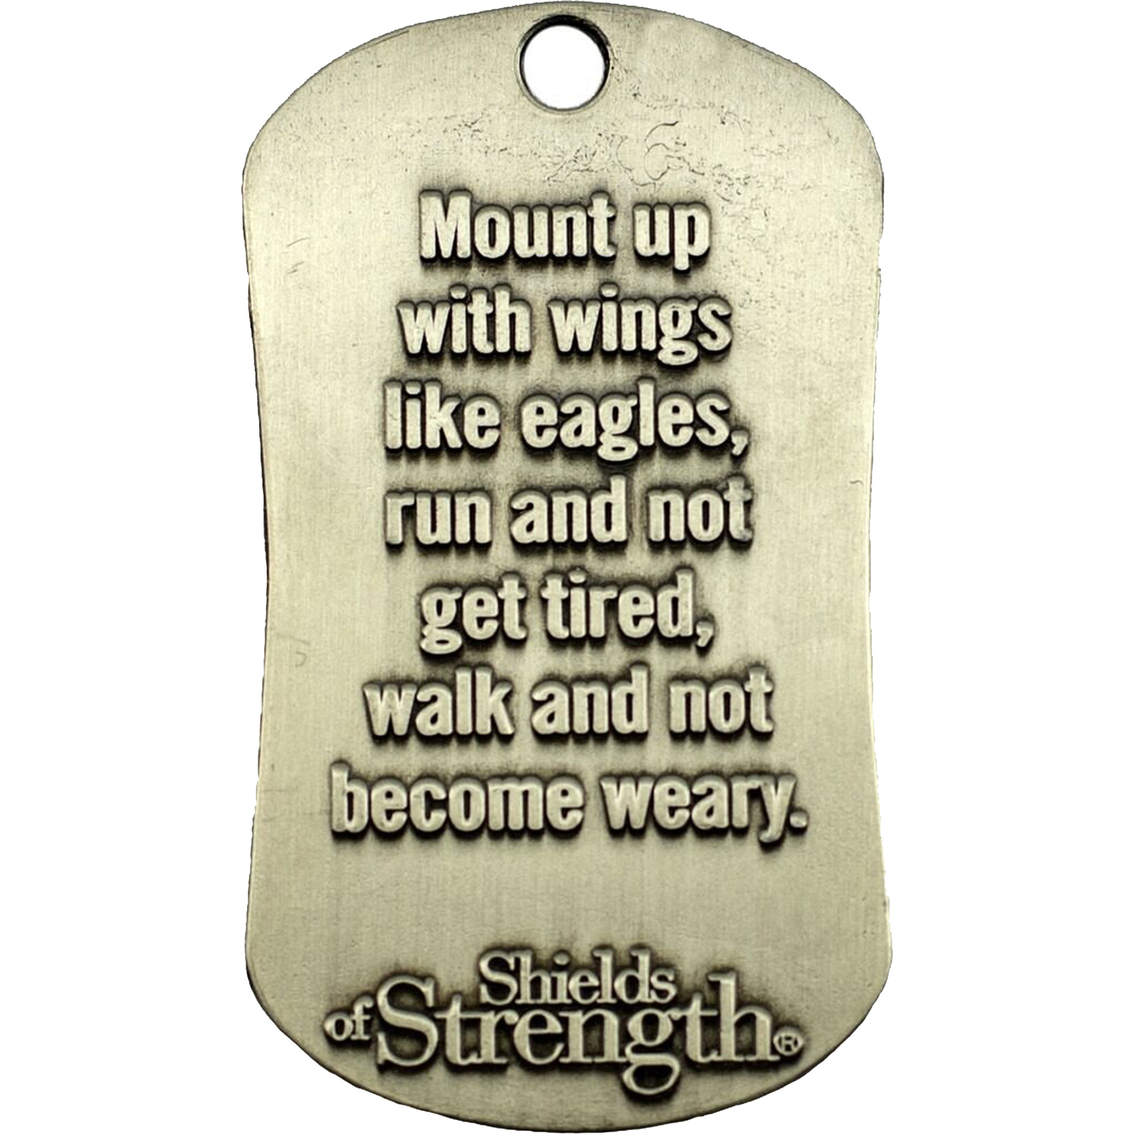 Shields of Strength Air Force Veteran Antique Finish Dog Tag Necklace, Isaiah 40:31 - Image 2 of 4